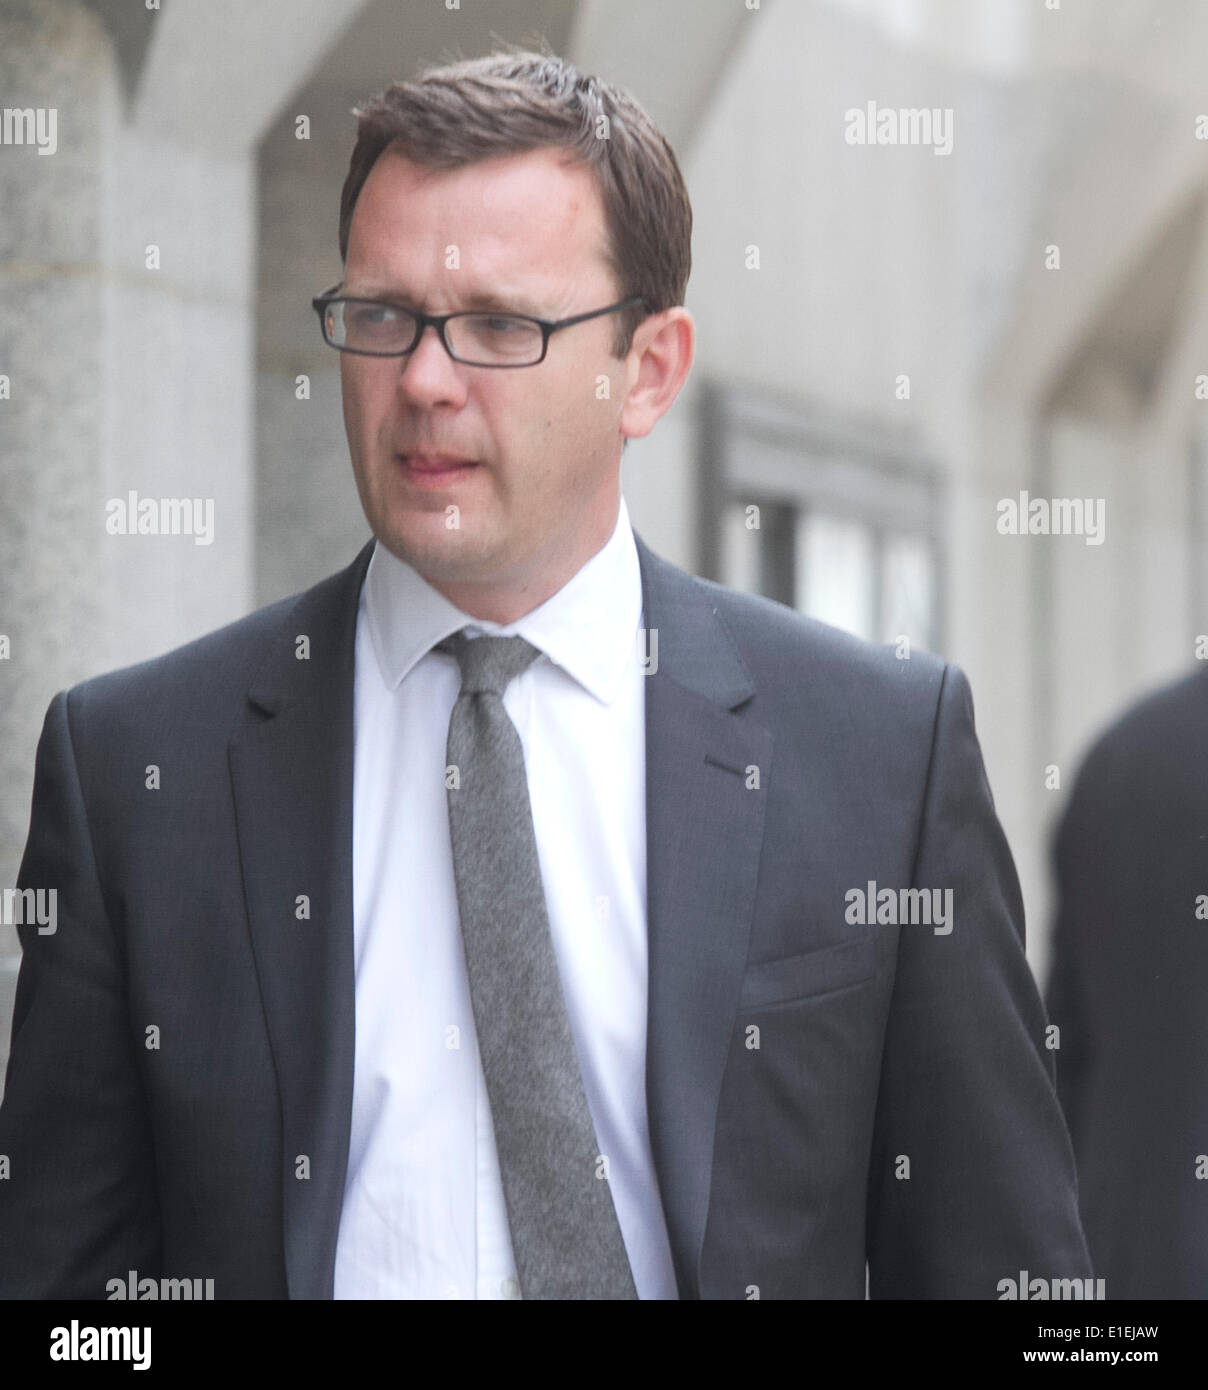 London UK. 2nd June 2014. Former Downing Street Director of Communications Andy Coulson arrives at the the Old Bailey as the hacking trial continues. Andy Coulson and seven other defendants including Rebekah Brooks, Charlie Brooks, Ian Edmonson, Stuart Kuttner,Clive Goodman,Cheryl Carter and Mark Hanna face charges related to allegations of conspiracy to intercept communications and voice mail of well know people including that of murder victim Milly Dowler Credit:  amer ghazzal/Alamy Live News Stock Photo